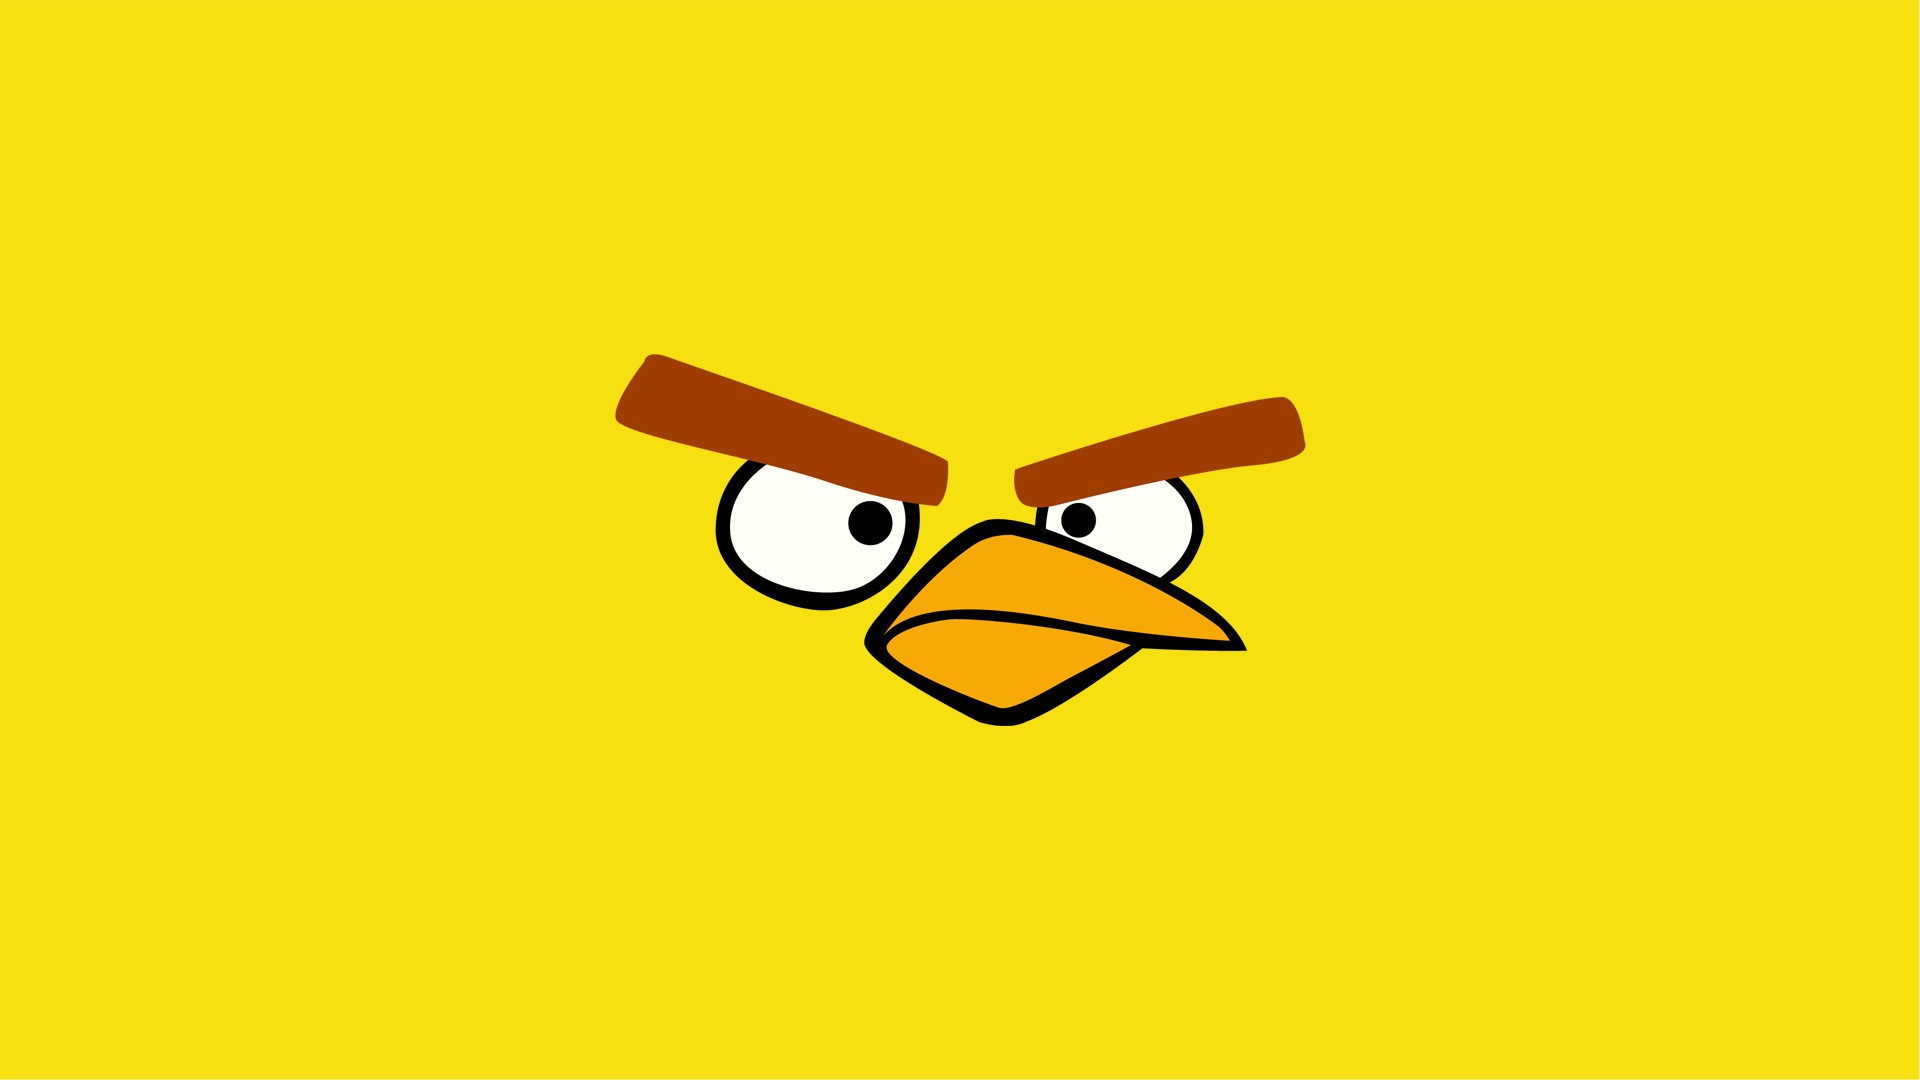 20 Best HD Angry Birds Wallpapers   DezineGuide 1920x1080